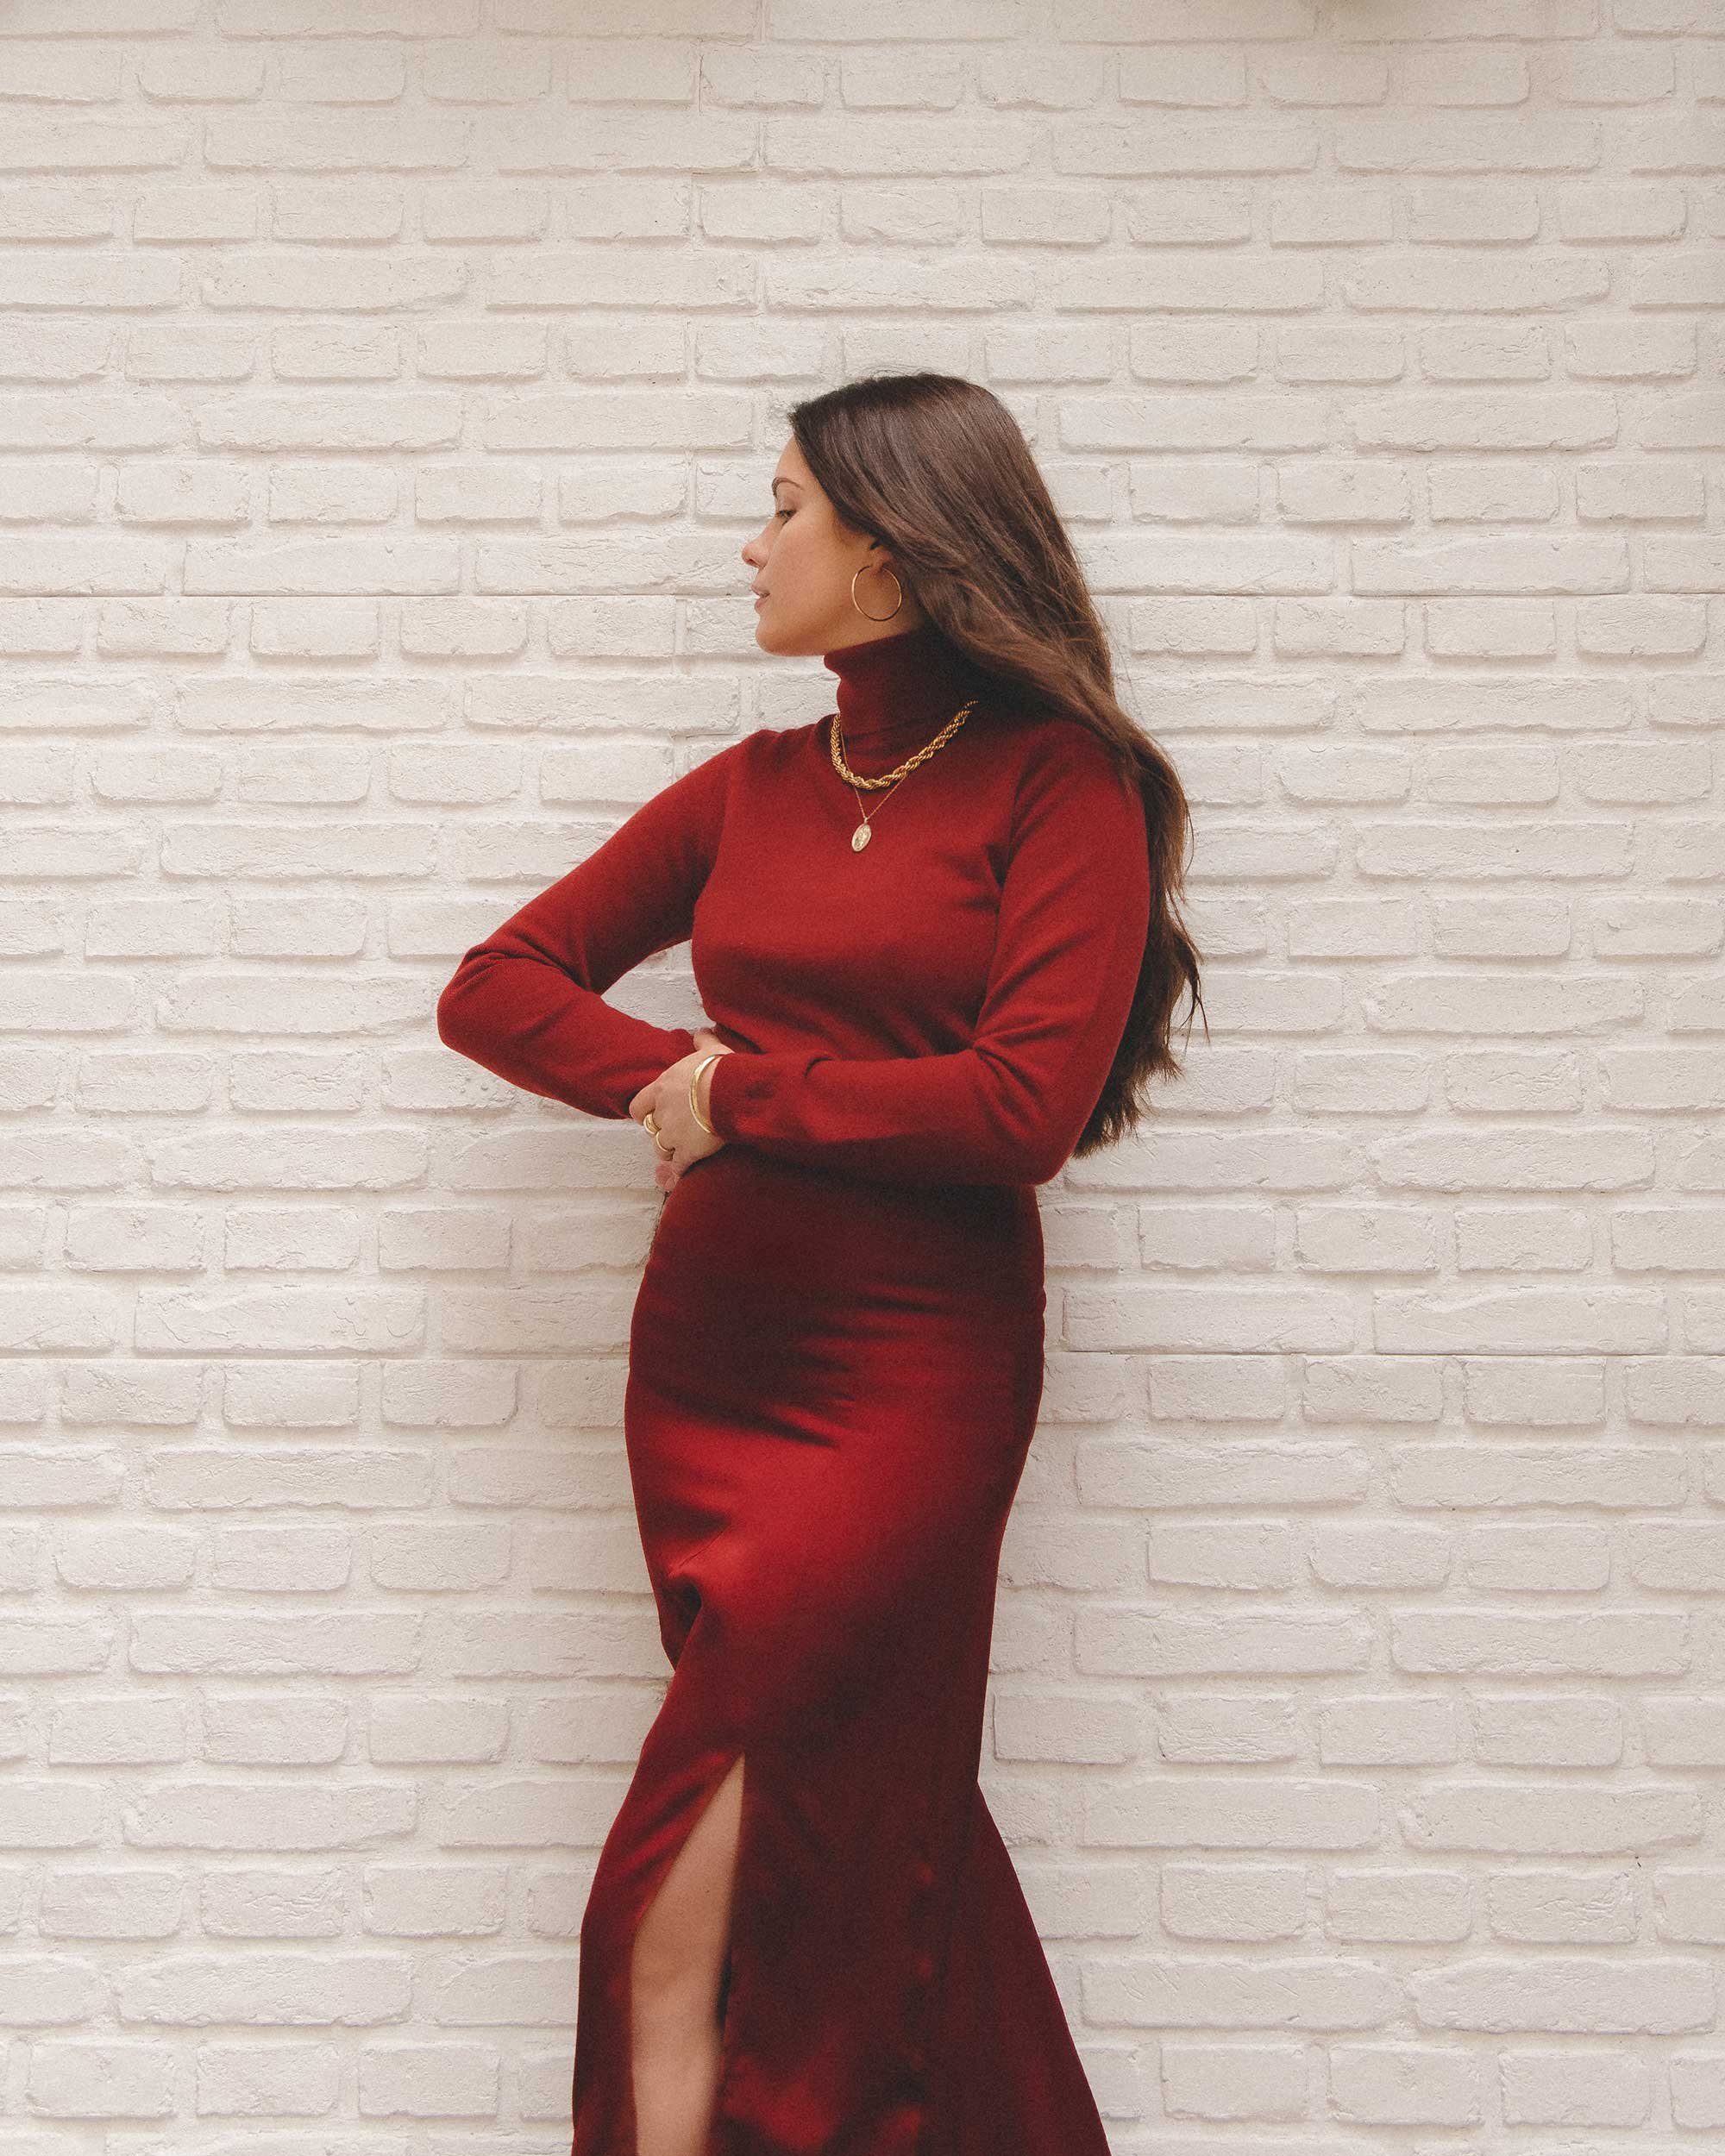 Holiday Party Outfit Idea. Sarah Butler of @sarahchristine wearing Falconeri Ultrasoft Red Cashmere Turtleneck Sweater and red satin skirt - 1.jpg